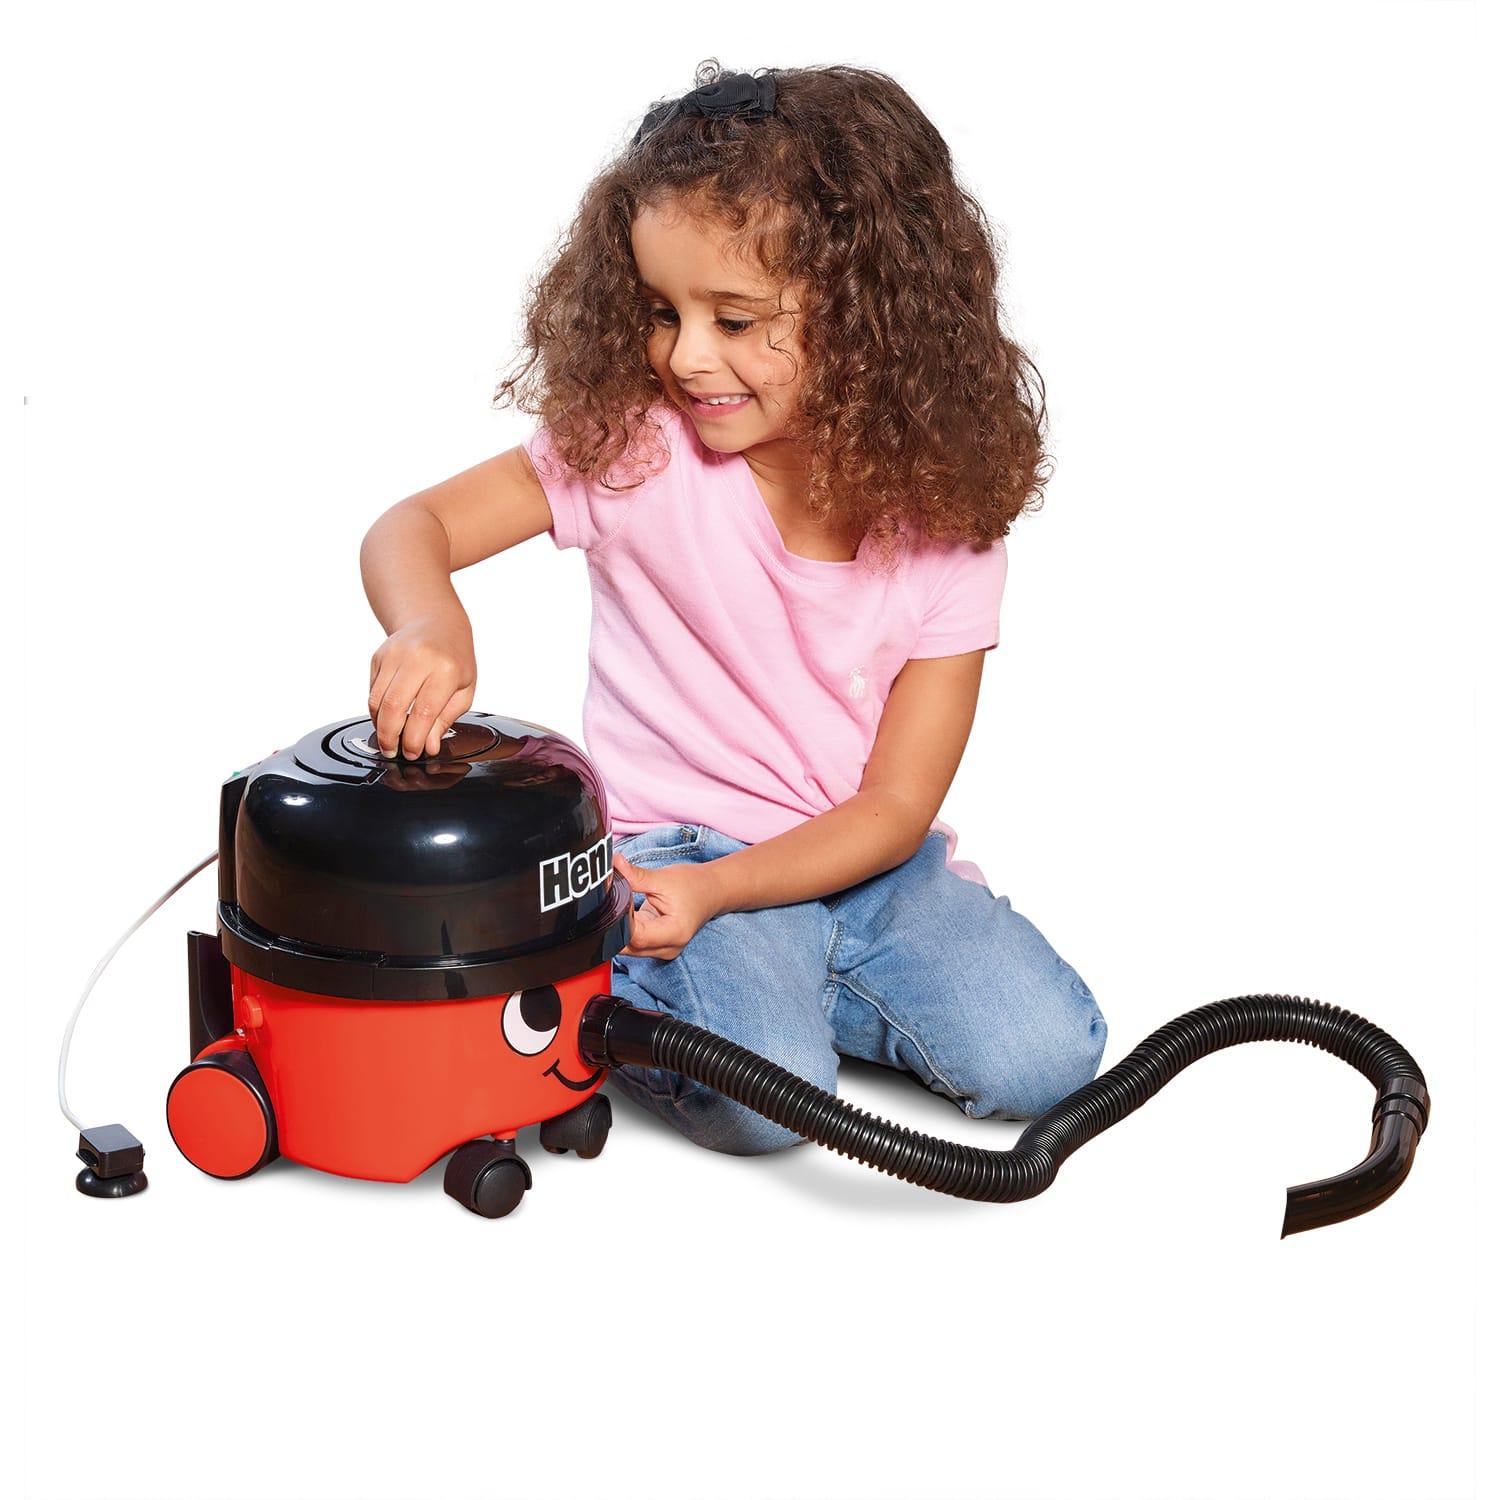 baby hoover toy